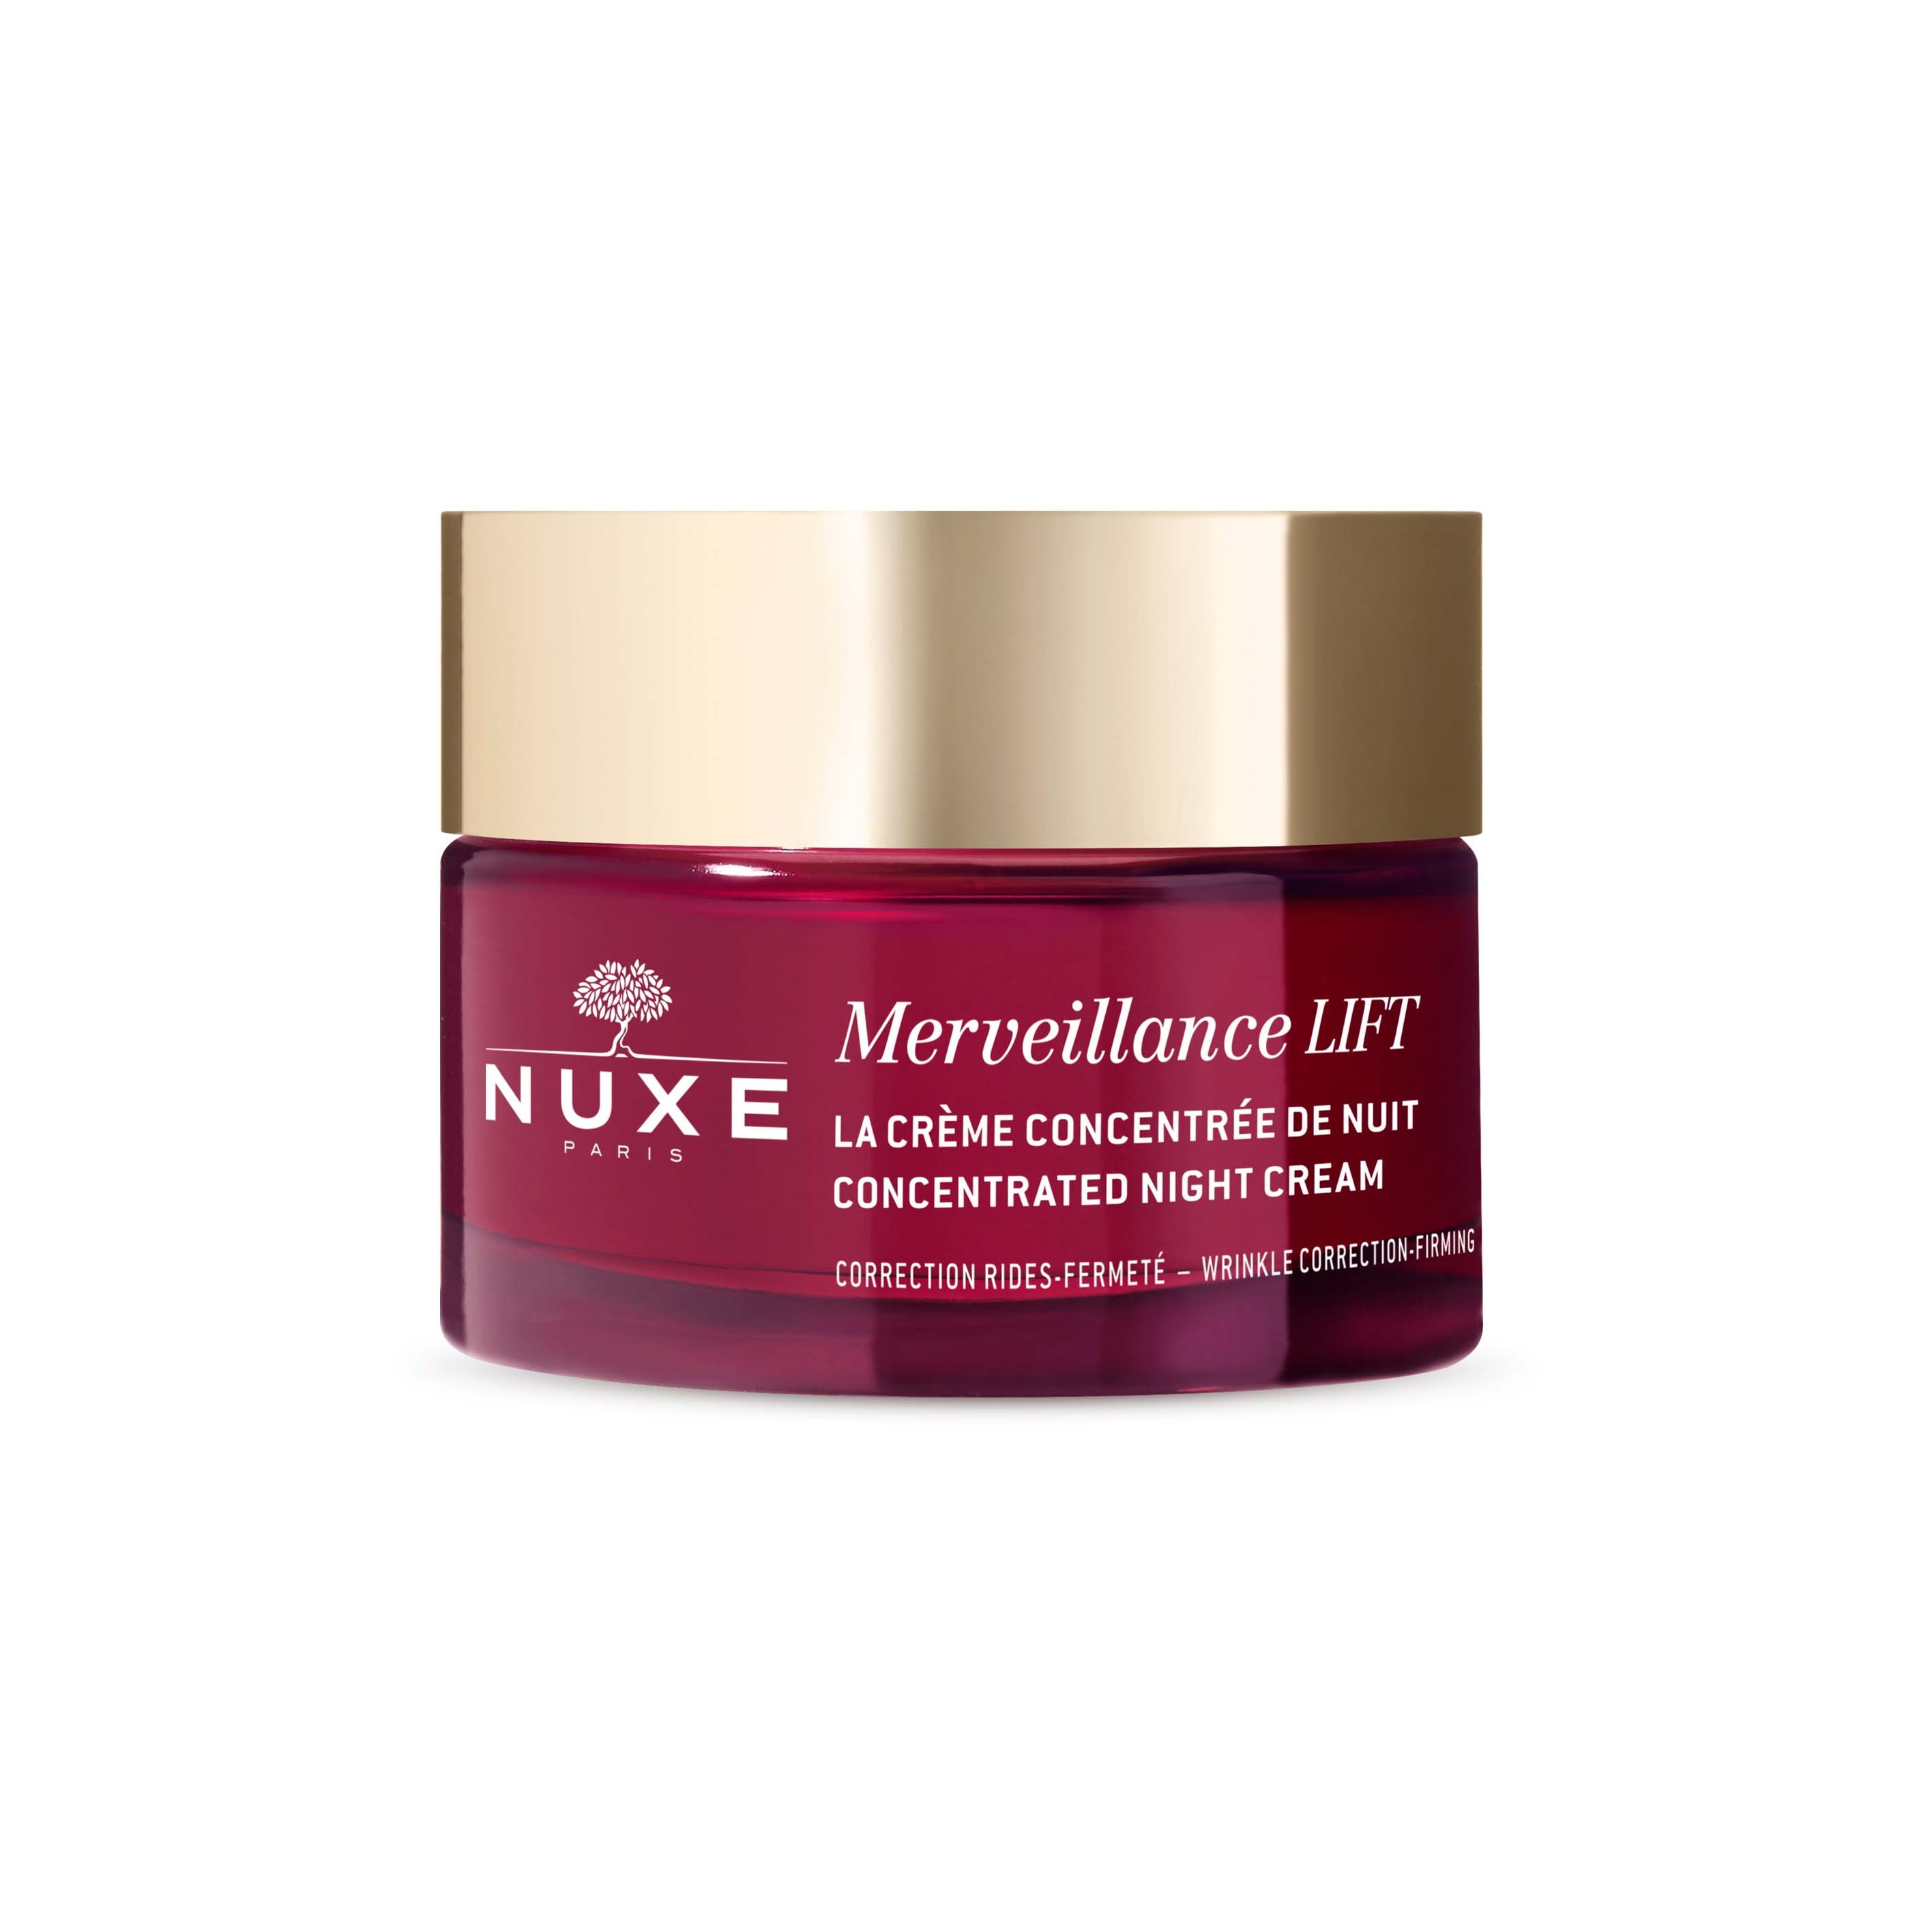 Nuxe Merveillance LIFT Concentrated Night Cream Wrinkle Correction - F